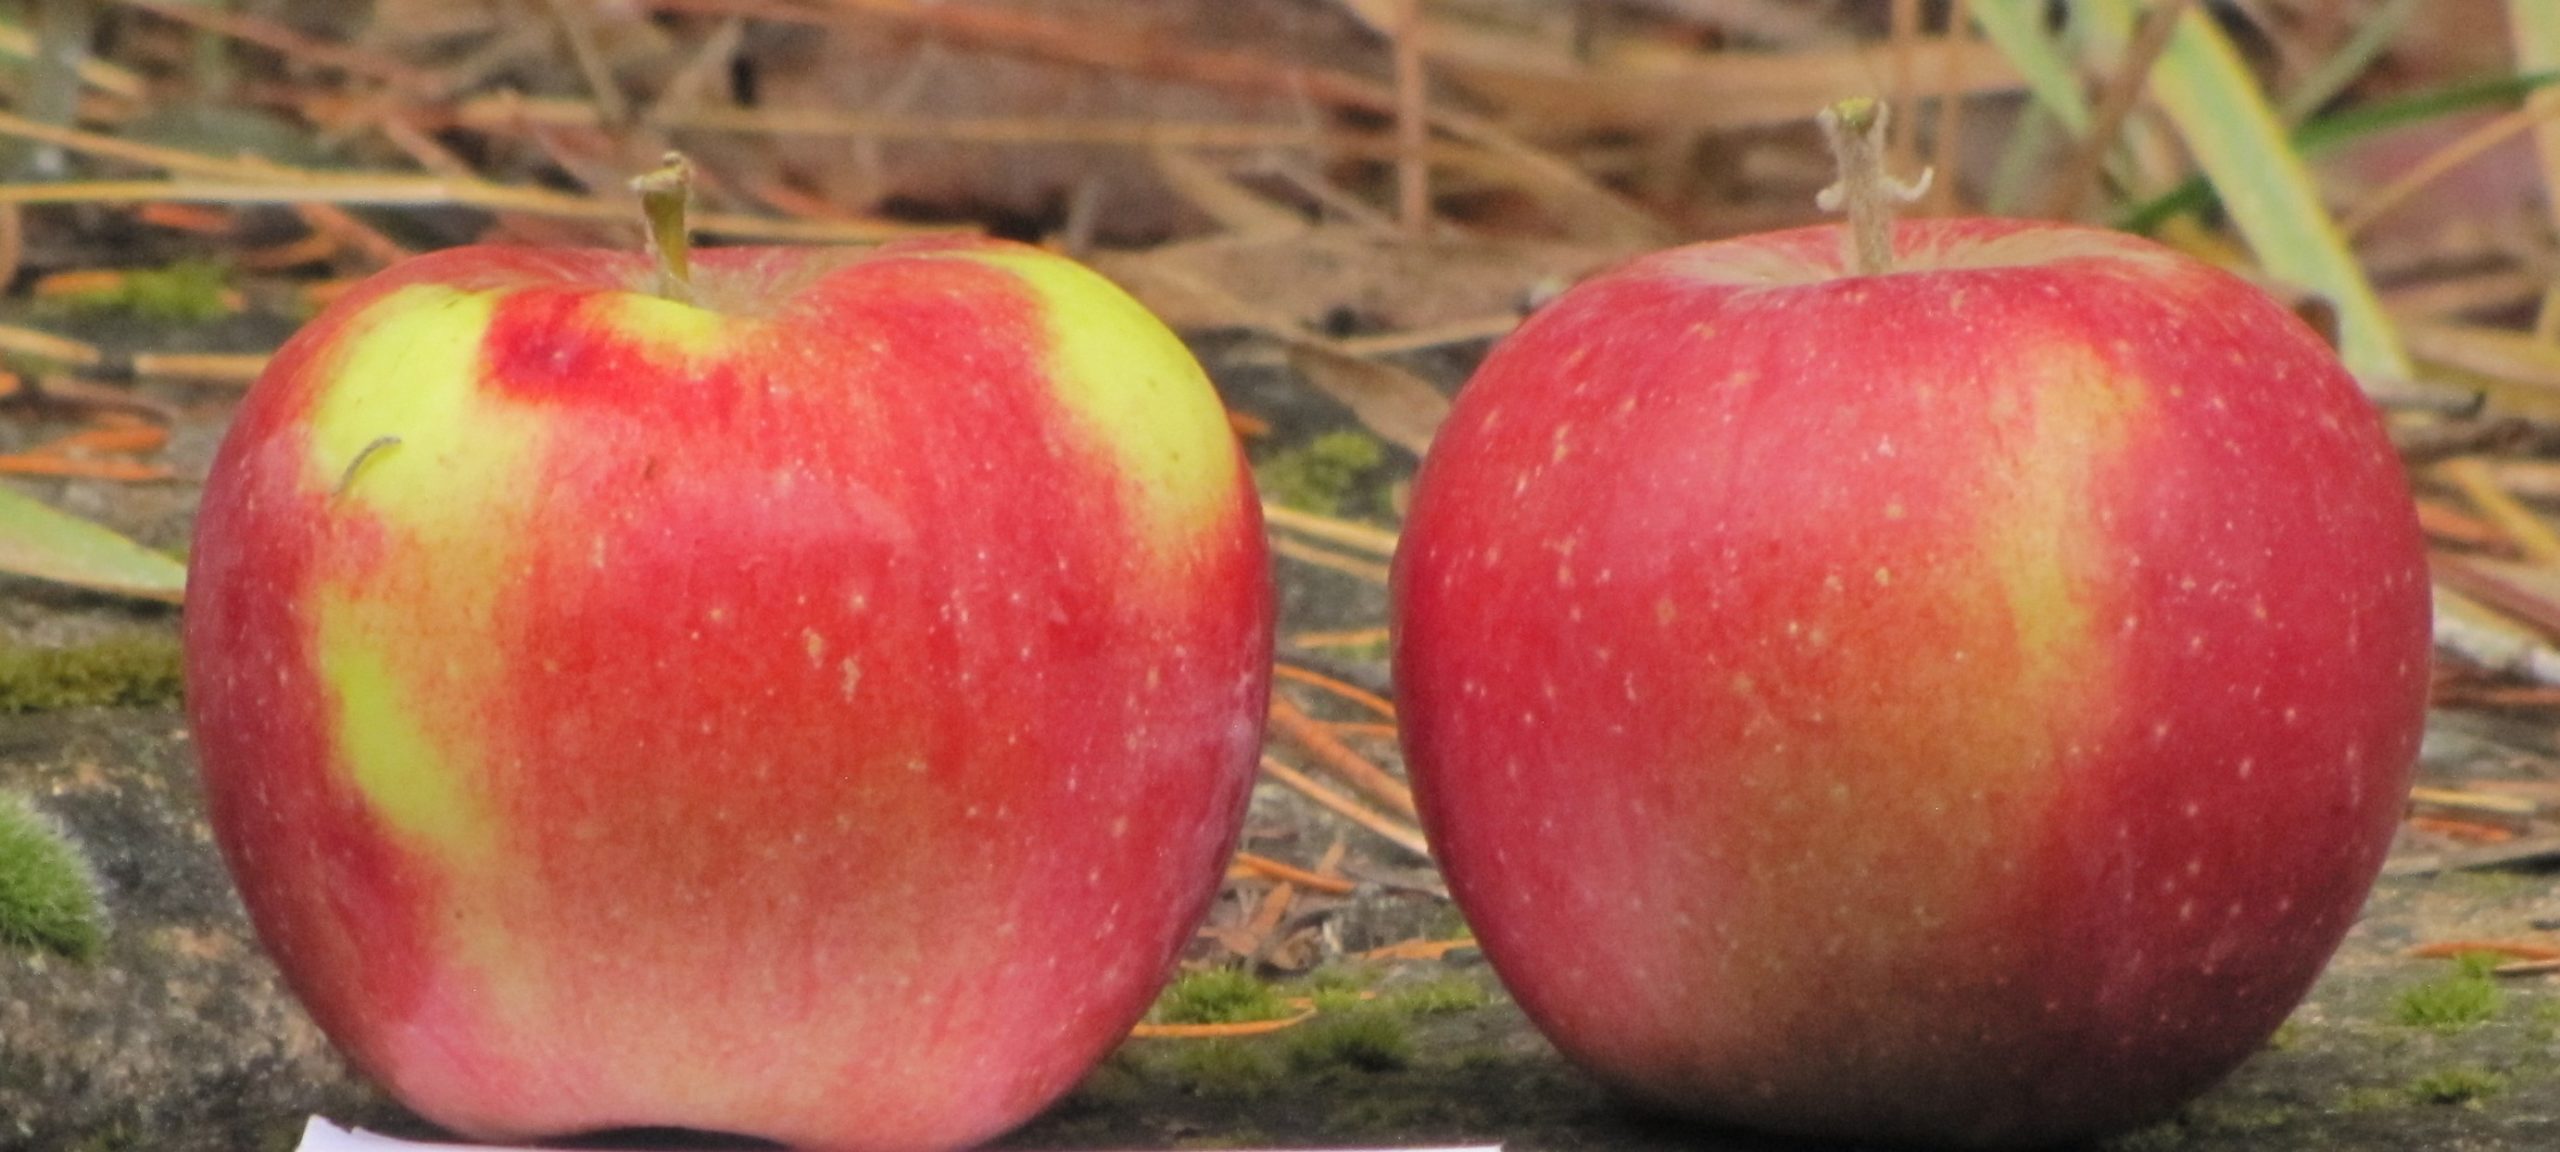 Why Apple Detectives Are Tracking Down Lost Varieties - Modern Farmer